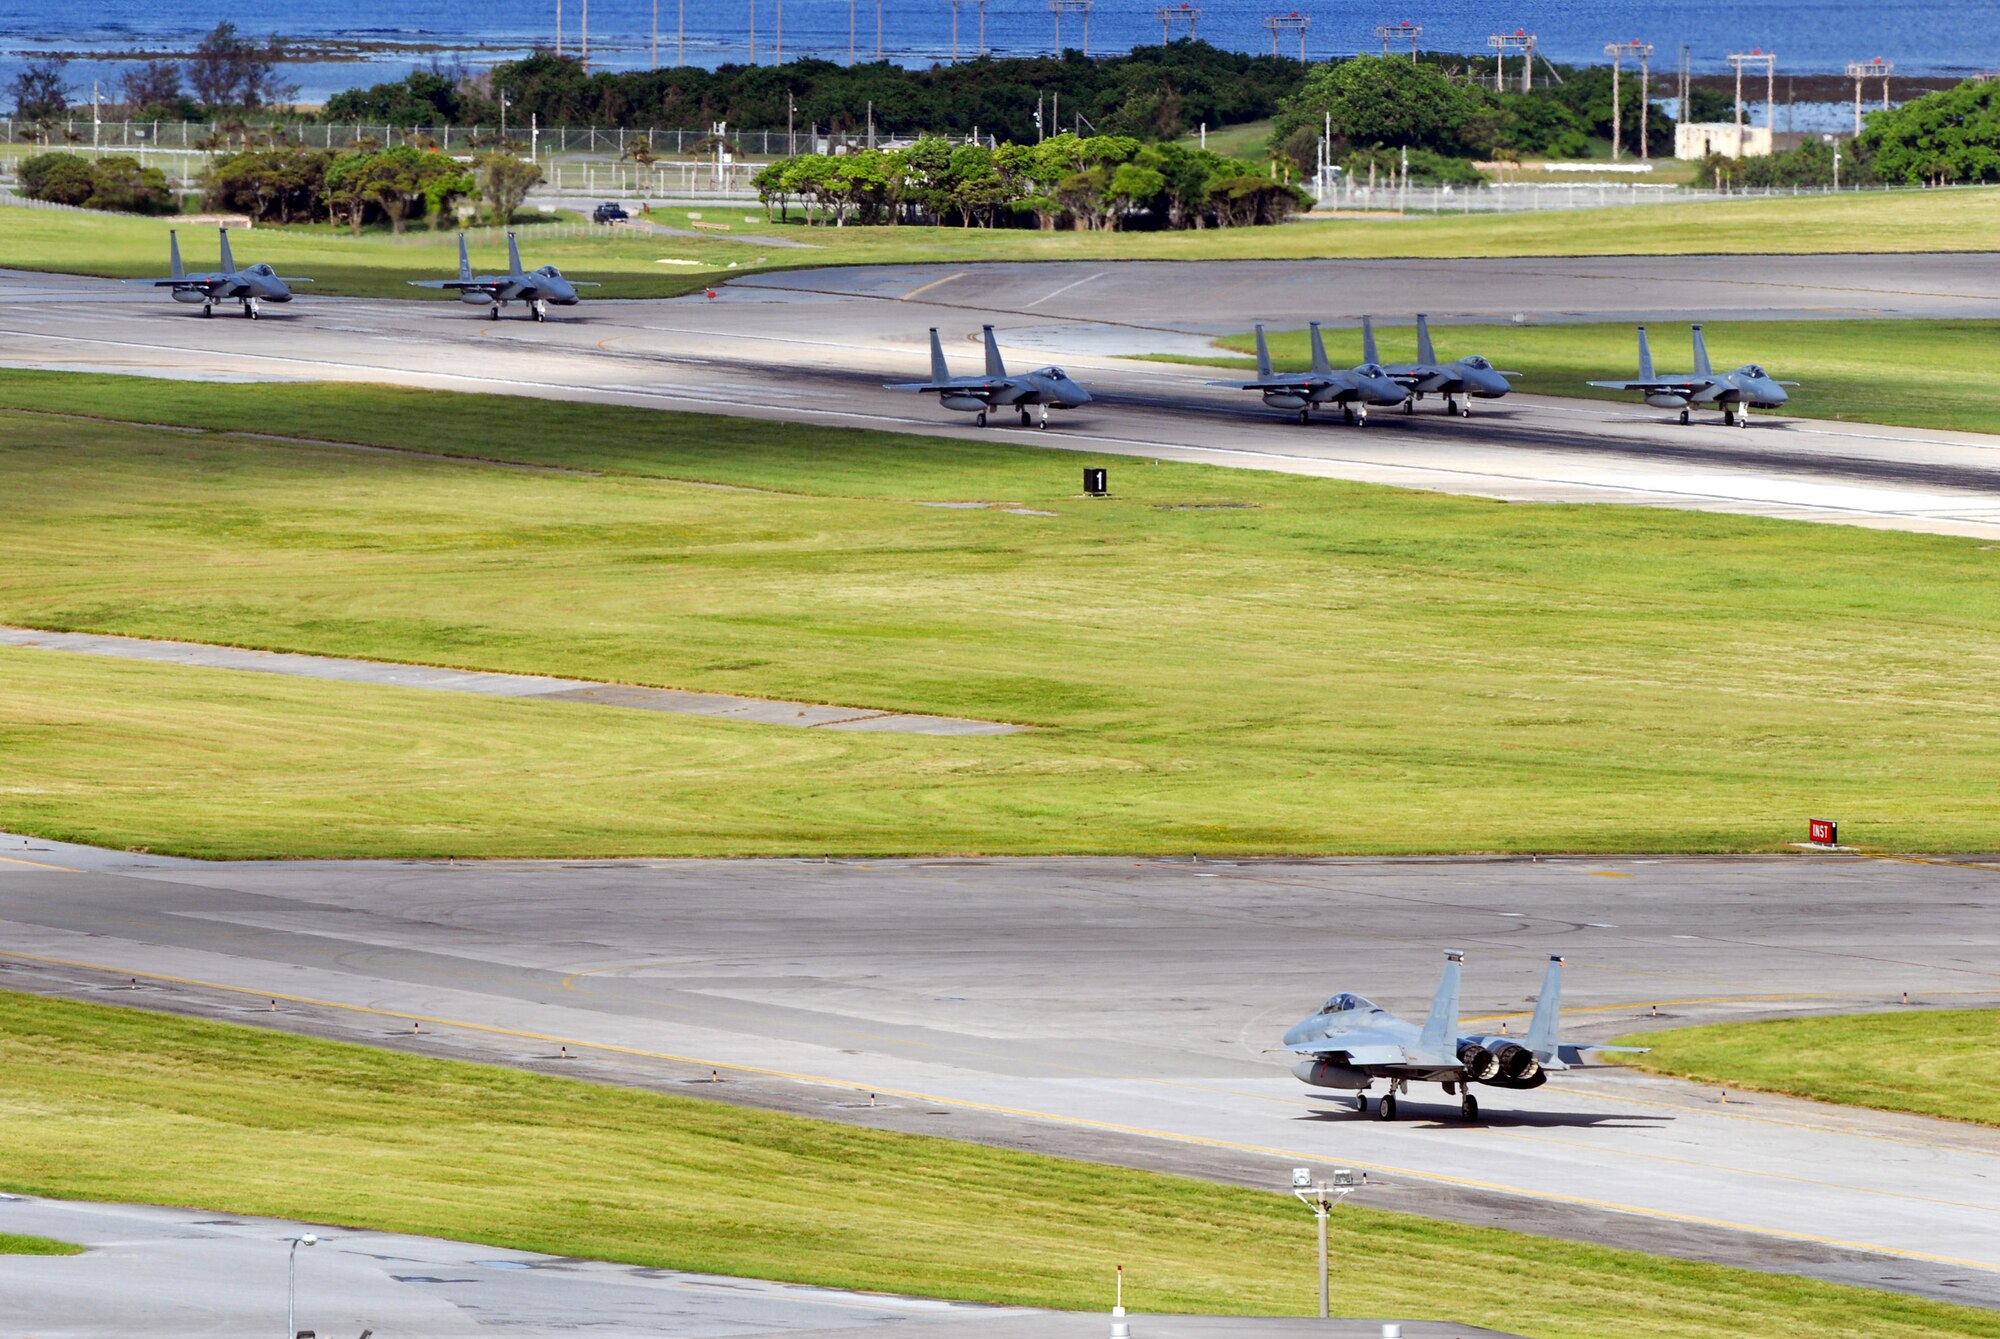 F-15 Eagles from Kadena Air Base, Japan, taxi down the flightline at Kadena Air Base, Japan, Aug. 5 enroute to Guam. The fighters are taking part in the 22,000-plus participant, joint service exercise Valiant Shield which runs through Aug. 14. (U.S. Air Force photo/Senior Airman Darnell T. Cannady)